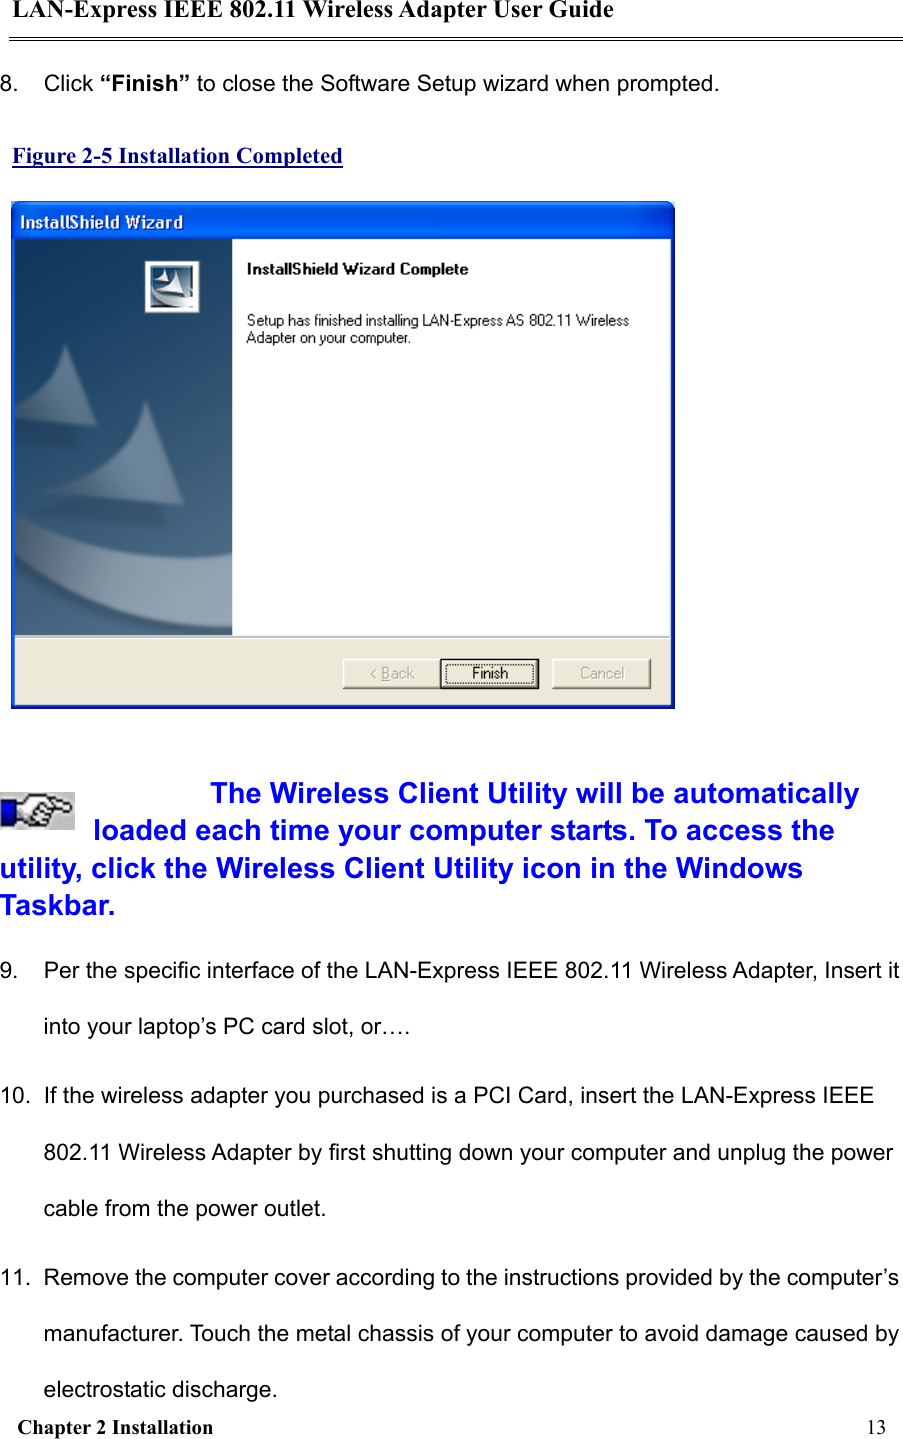 LAN-Express IEEE 802.11 Wireless Adapter User Guide  Chapter 2 Installation     13     8. Click “Finish” to close the Software Setup wizard when prompted. Figure 2-5 Installation Completed   The Wireless Client Utility will be automatically loaded each time your computer starts. To access the utility, click the Wireless Client Utility icon in the Windows Taskbar.  9.  Per the specific interface of the LAN-Express IEEE 802.11 Wireless Adapter, Insert it into your laptop’s PC card slot, or….   10.  If the wireless adapter you purchased is a PCI Card, insert the LAN-Express IEEE 802.11 Wireless Adapter by first shutting down your computer and unplug the power cable from the power outlet.  11.  Remove the computer cover according to the instructions provided by the computer’s manufacturer. Touch the metal chassis of your computer to avoid damage caused by electrostatic discharge. 